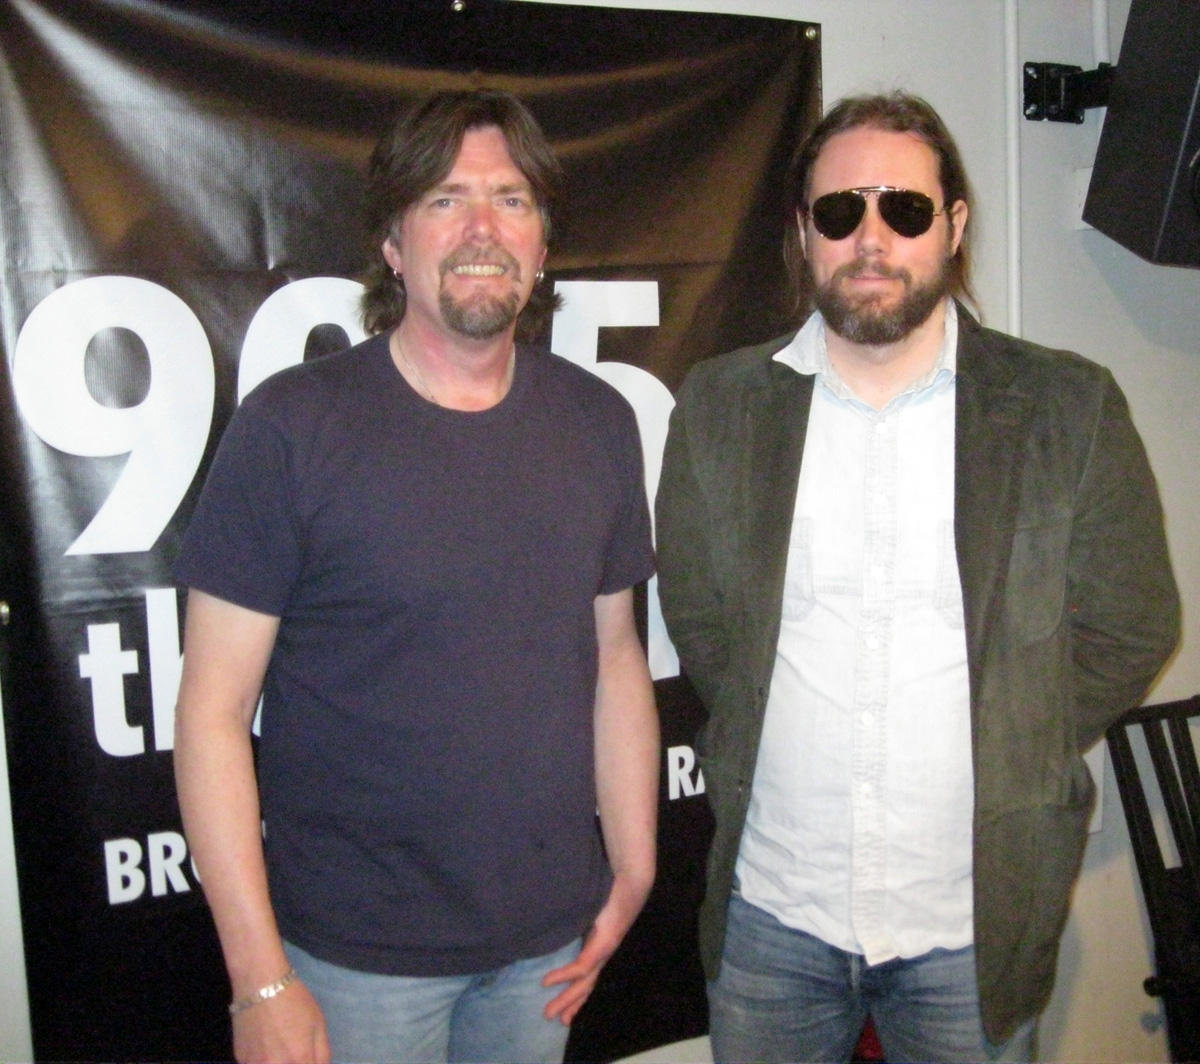 Former Black Crowe’s guitarist Rich Robinson meets up with WBJB's Rich Robinson